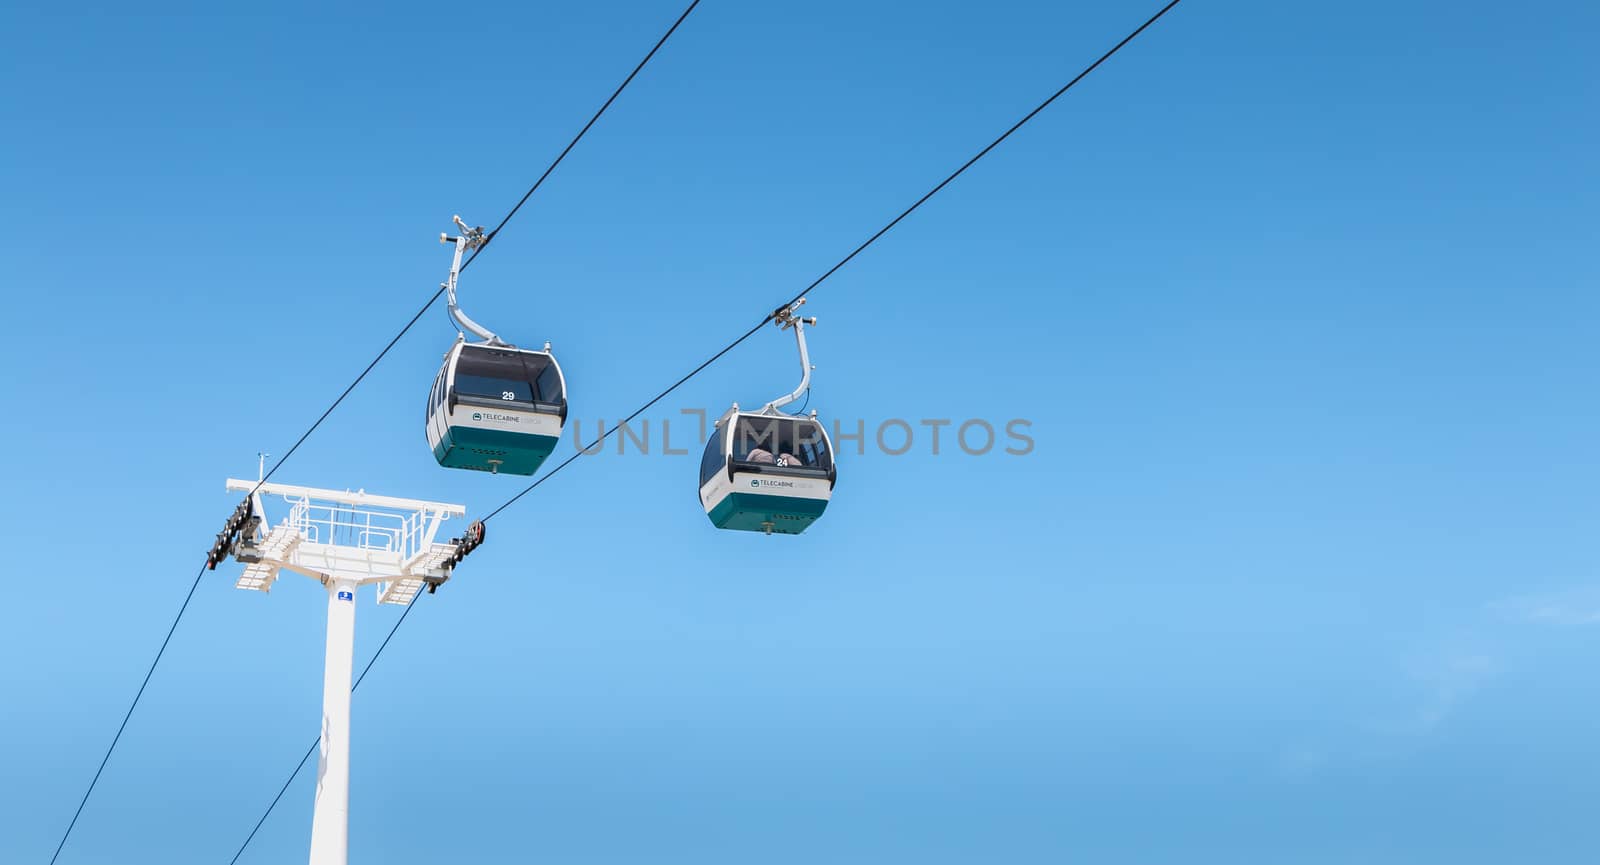 Lisbon, Portugal - May 7, 2018: Telecabine Lisboa at Park of Nations (Parque das Nacoes). Cable car in the modern district of Lisbon over the Tagus river on a spring day